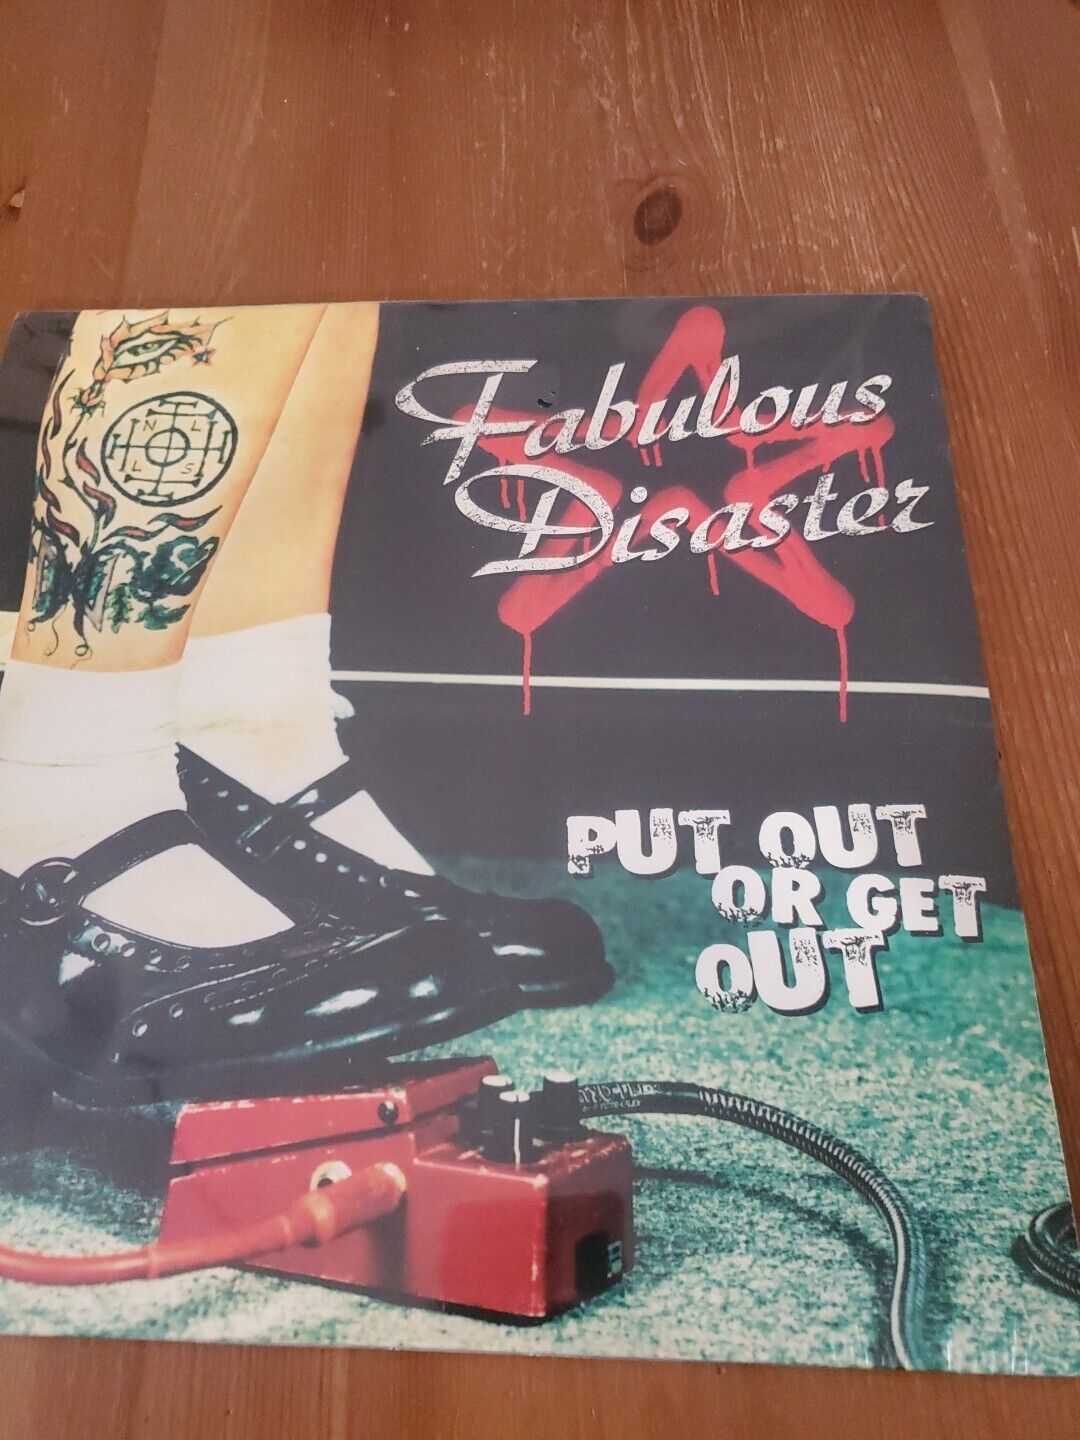 Put Out or Get Out by Fabulous Disaster (Record, 2001) Punk NOFX